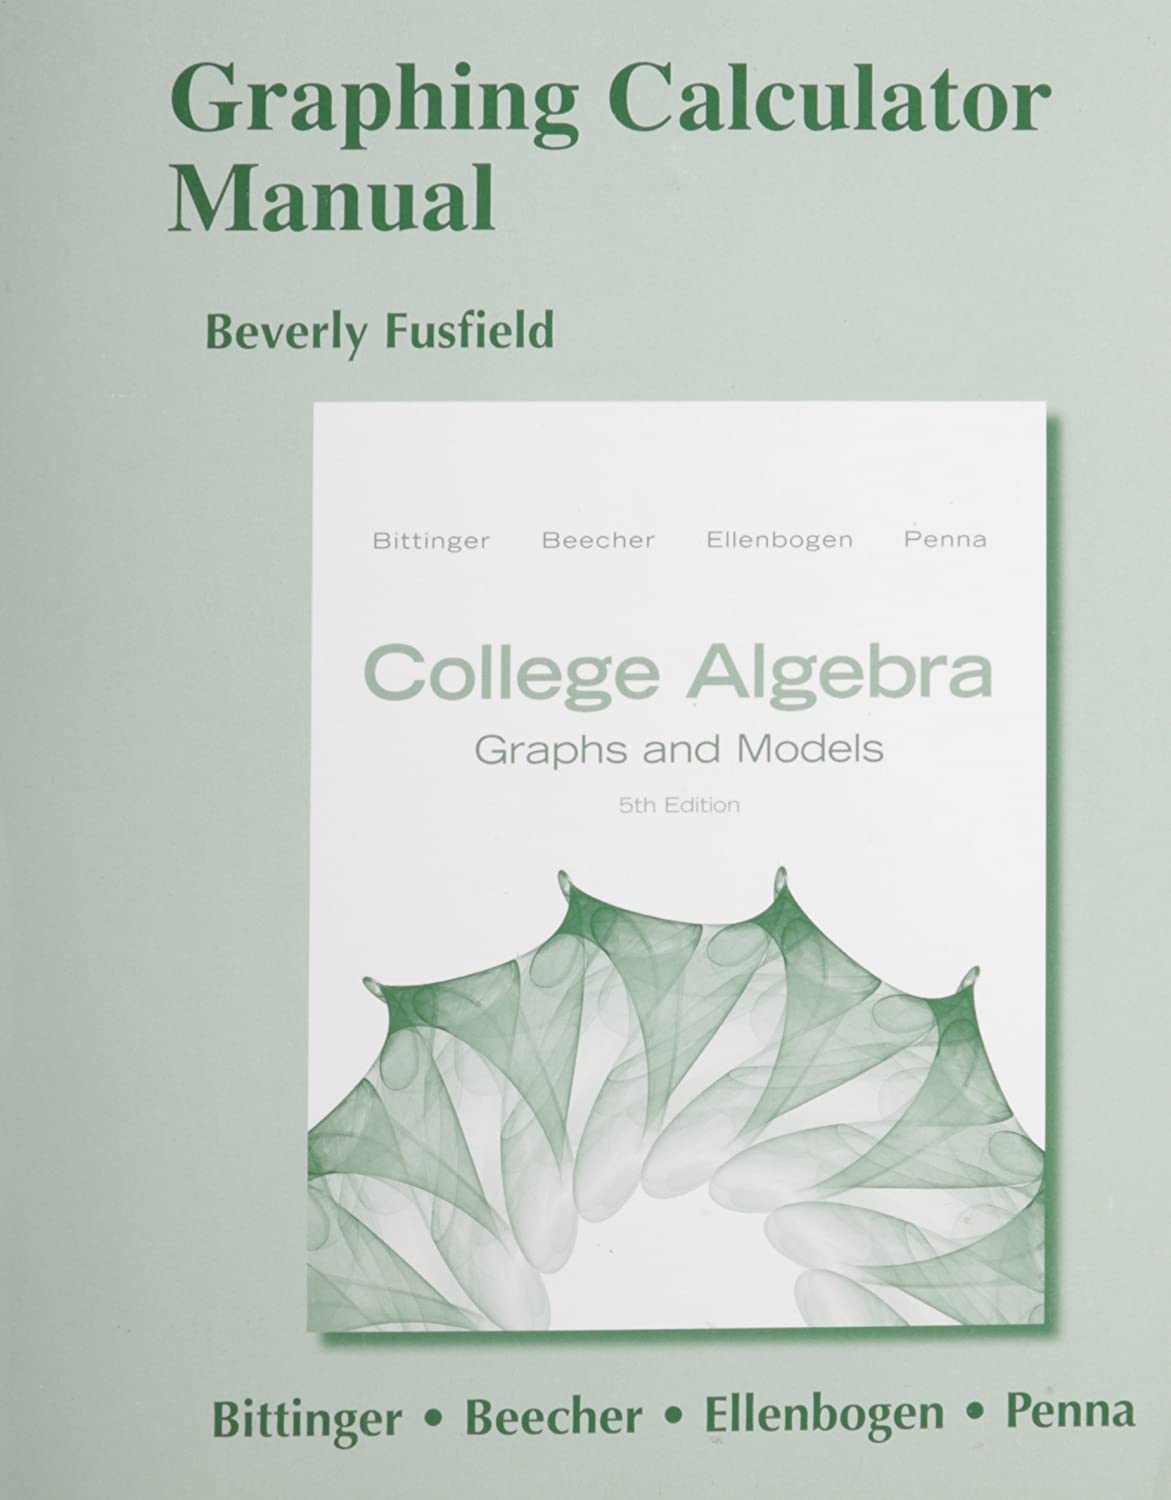 Graphing Calculator Manual for College Algebra: Graphs and Models